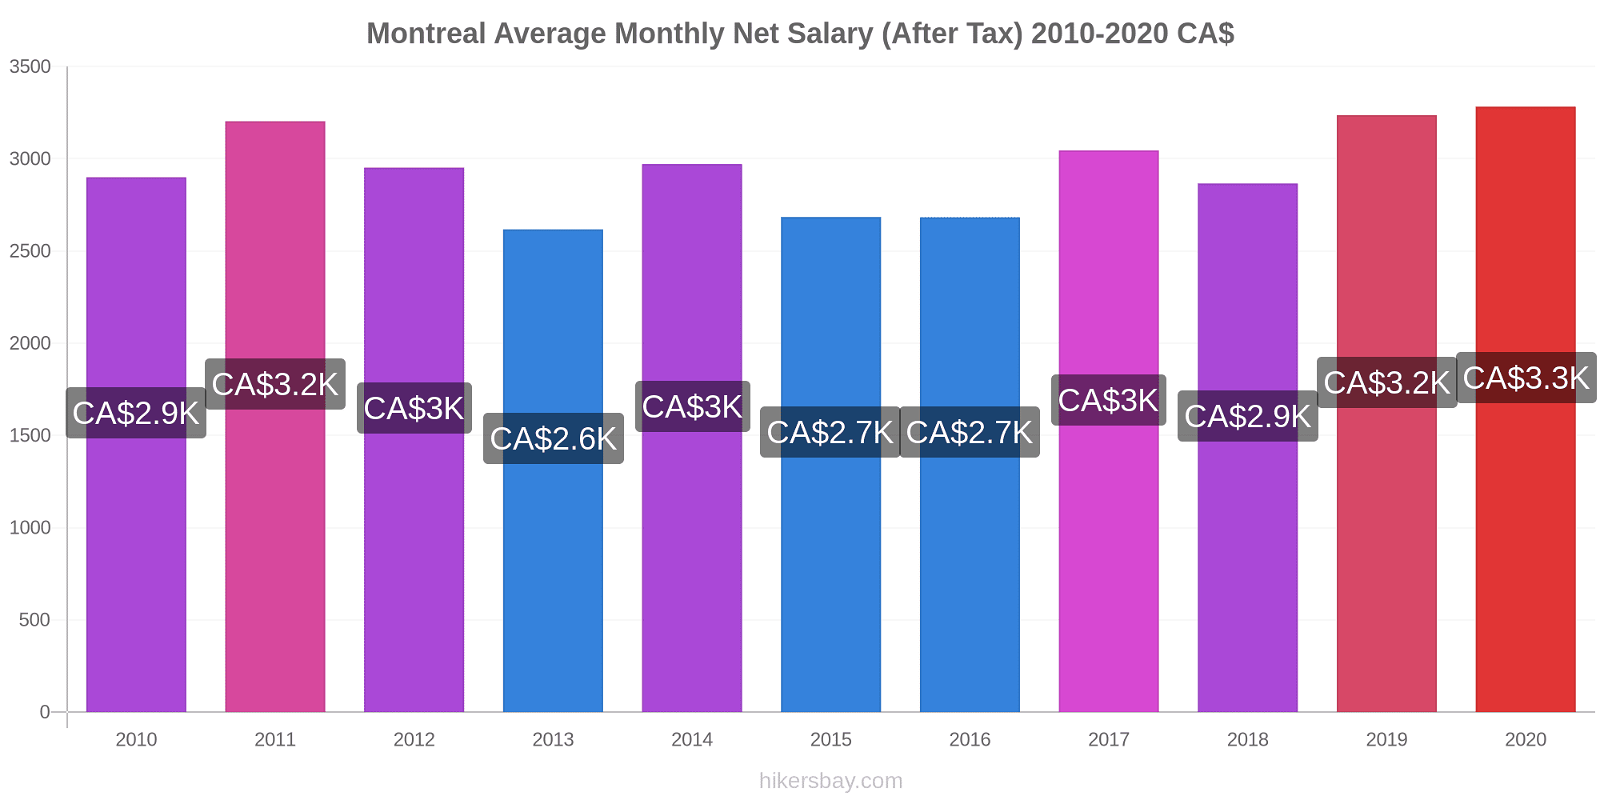 Montreal price changes Average Monthly Net Salary (After Tax) hikersbay.com